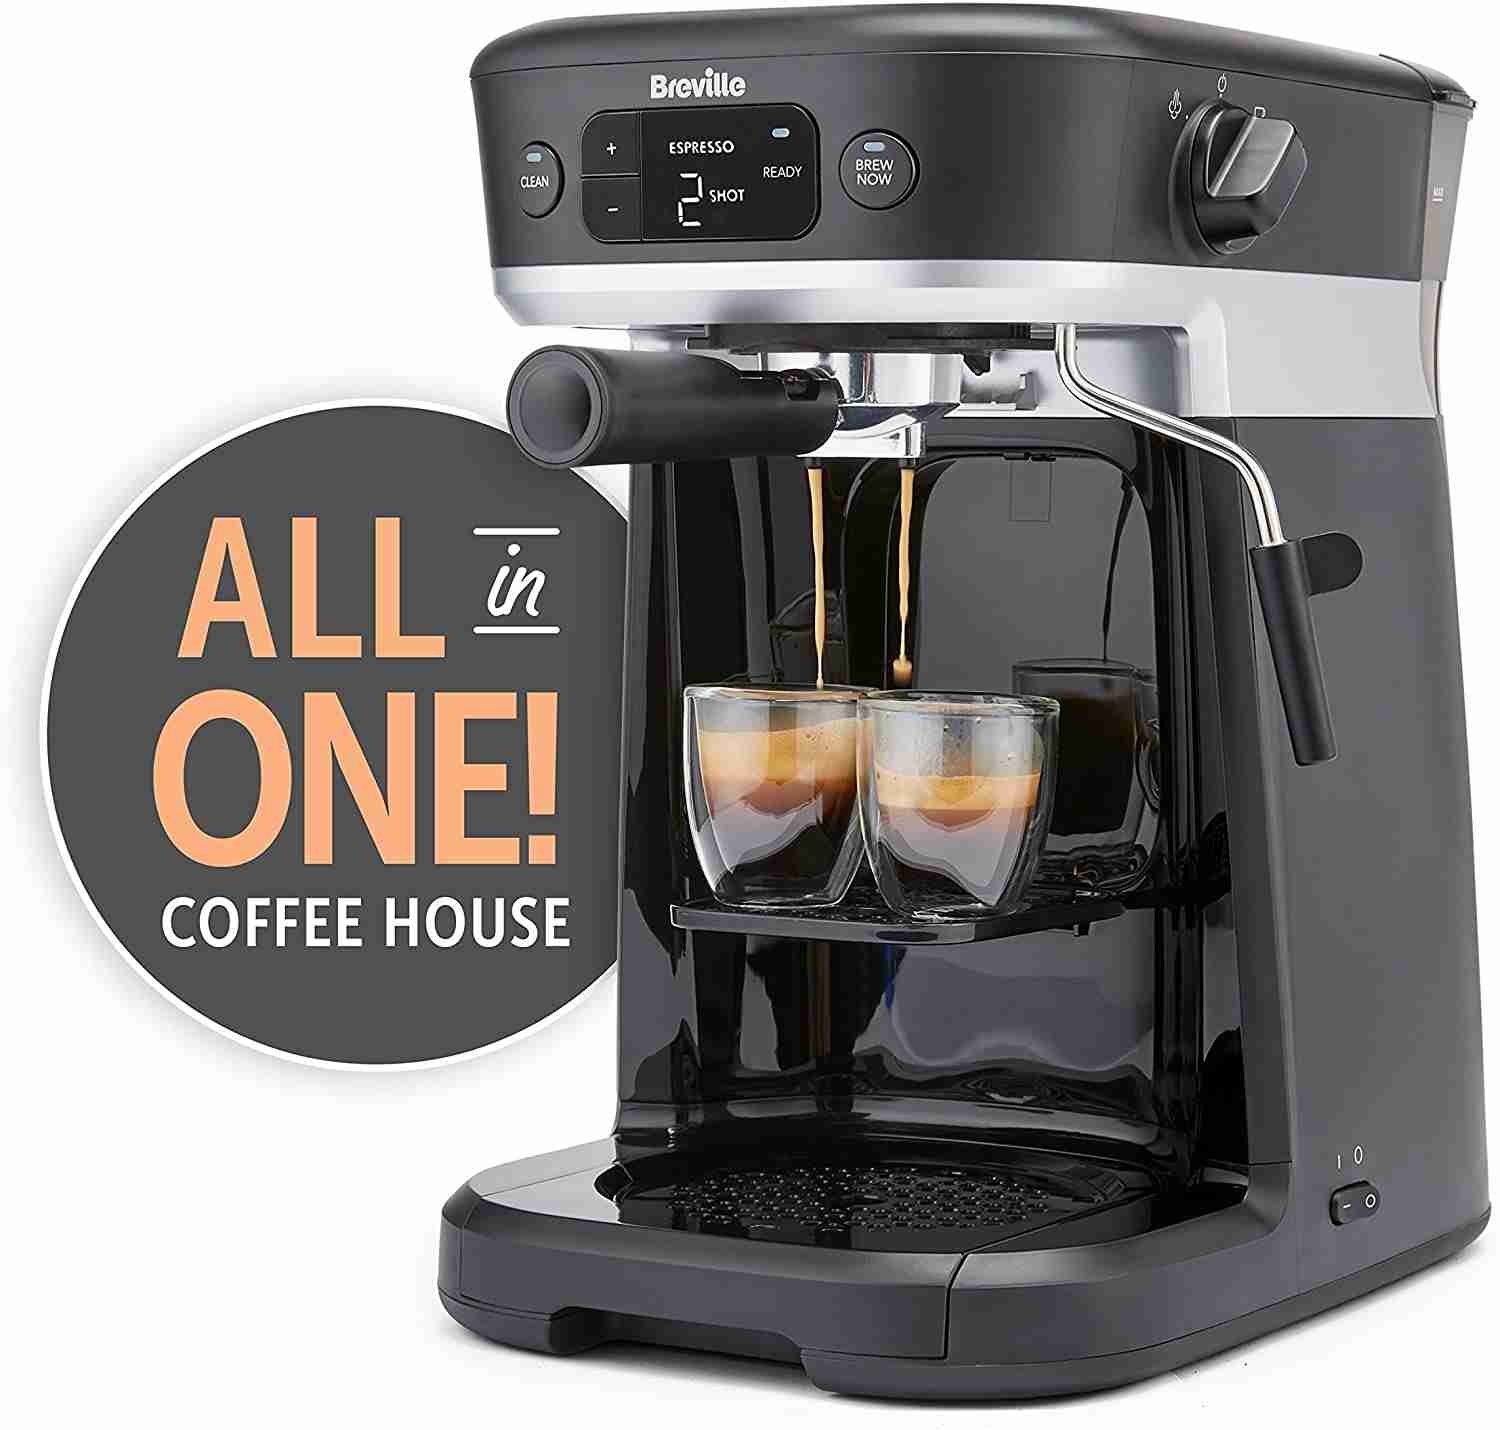 https://morningcoffeejournal.com/wp-content/uploads/2020/06/Breville-All-in-One-Coffee-House-Espresso-Filter-and-Pods-Coffee-Machine.jpg